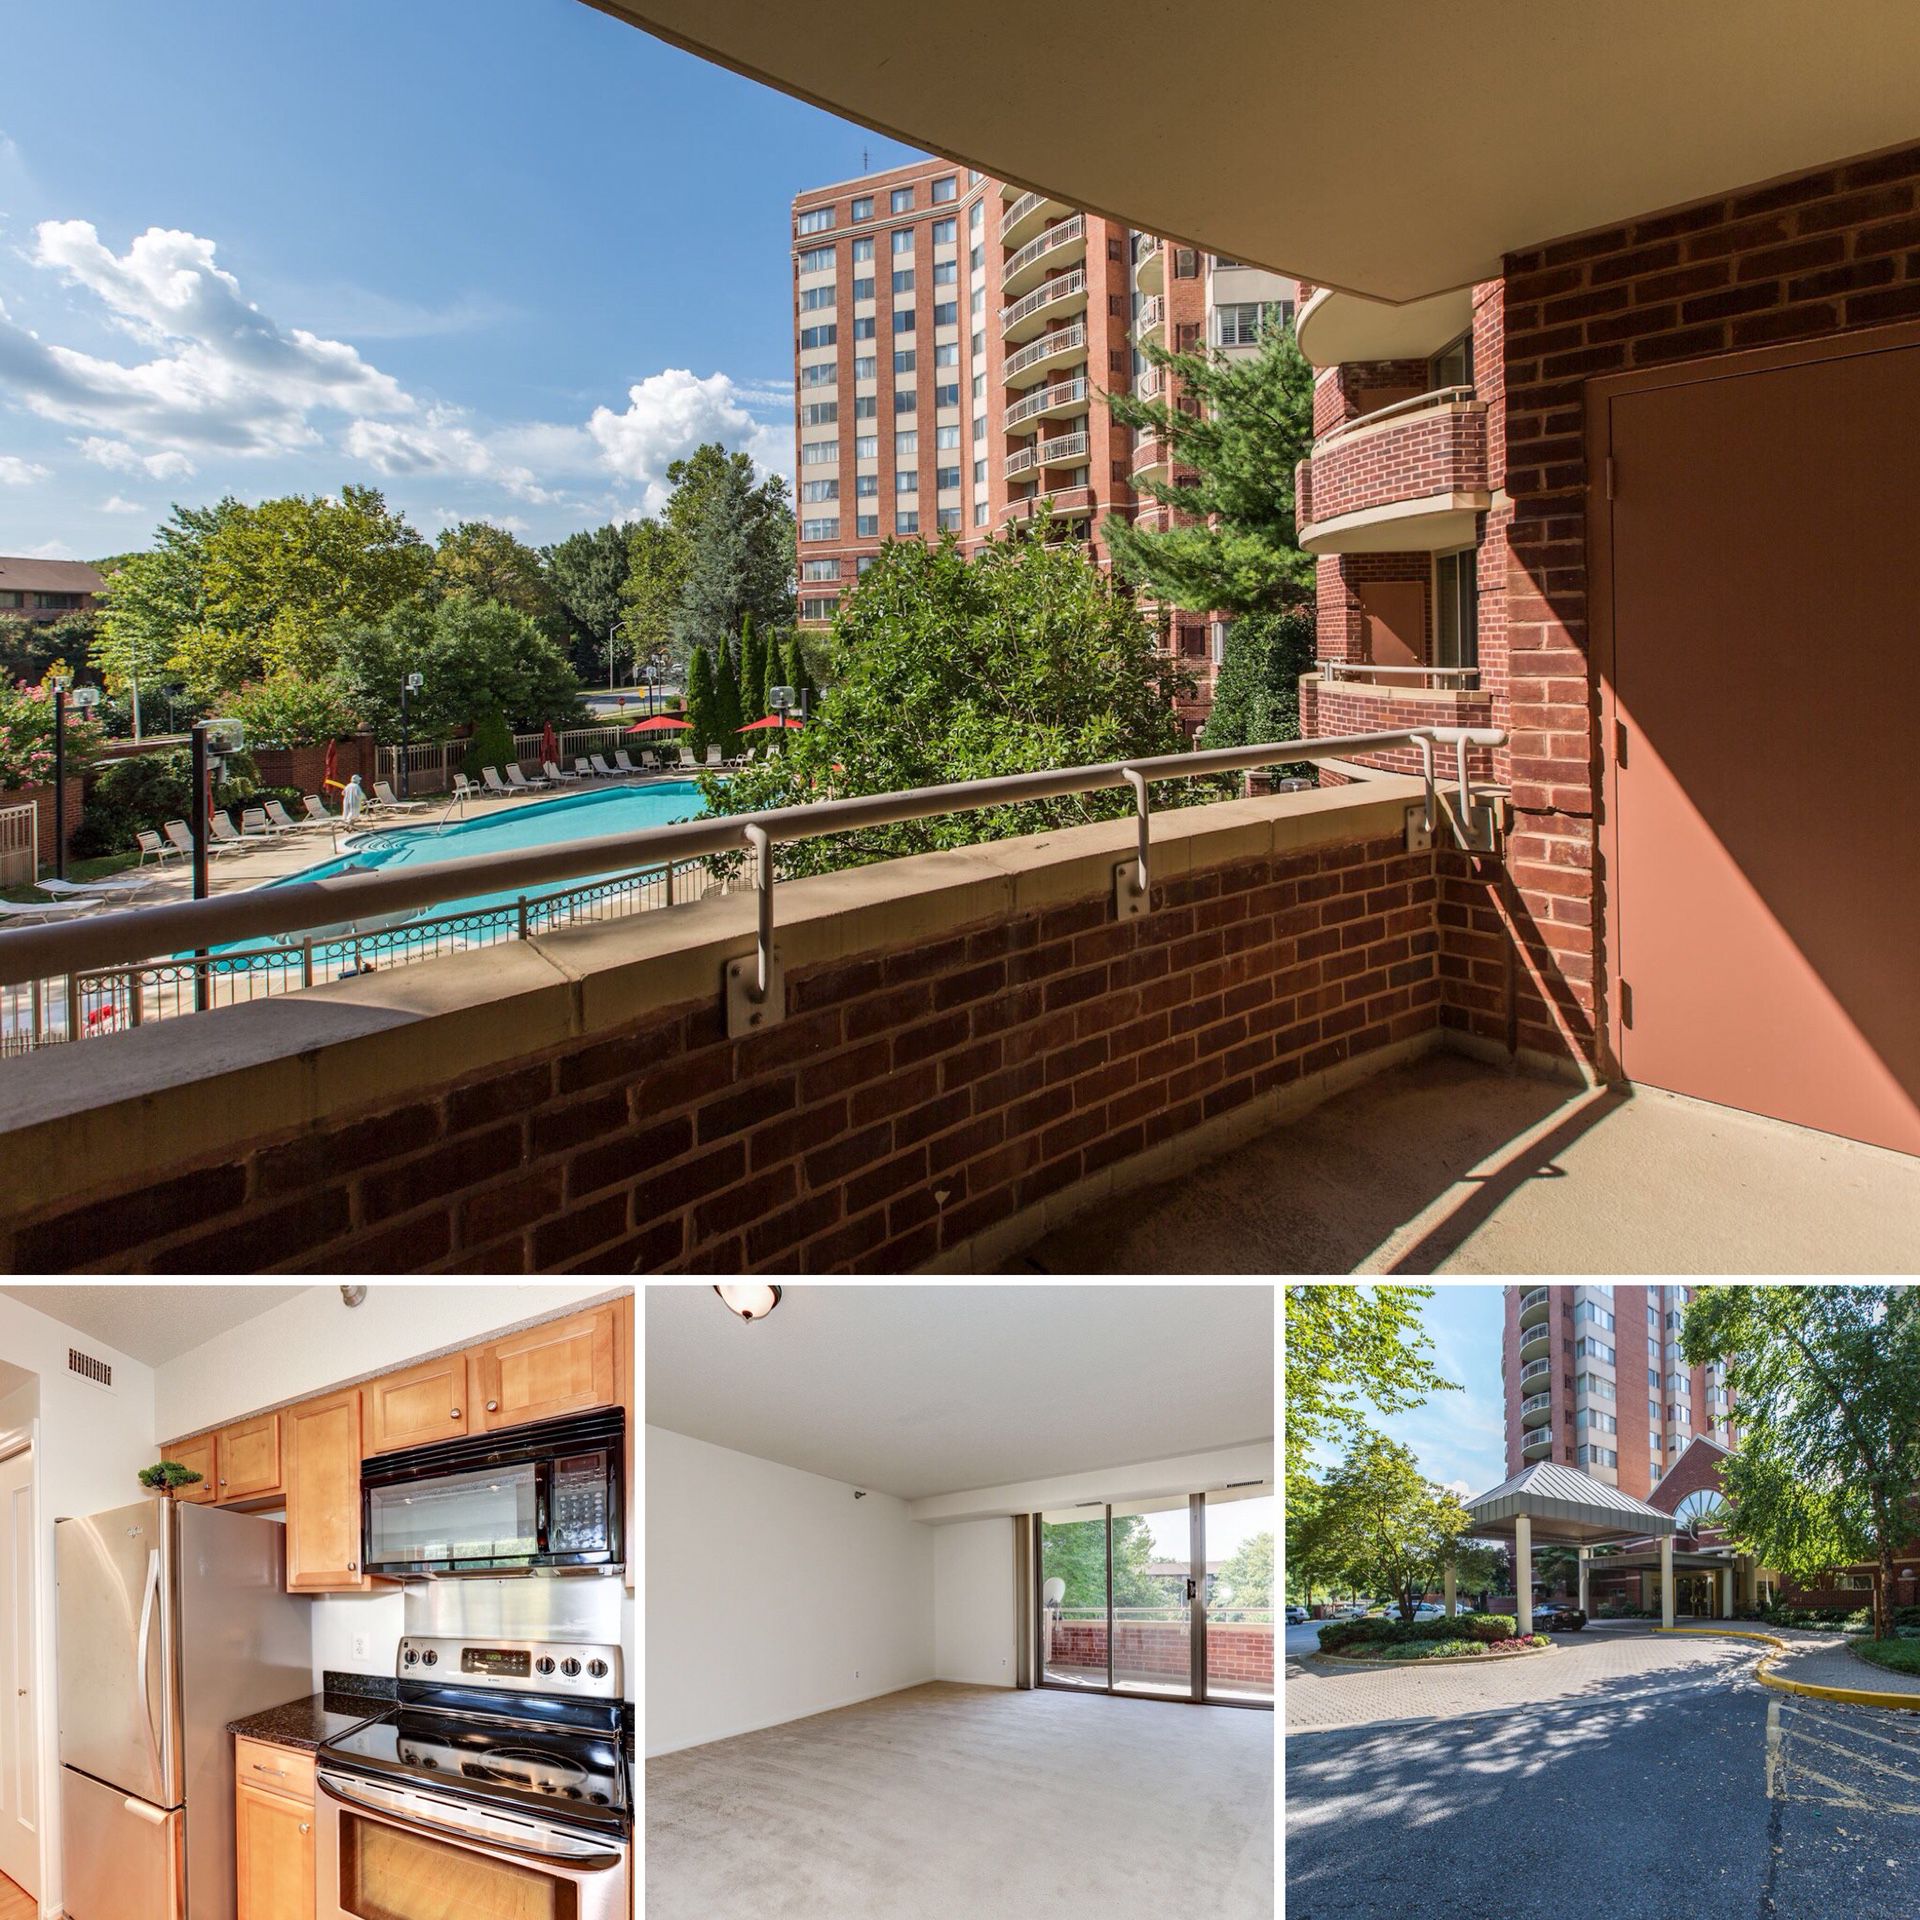 Reduced $15k plus closing cost assistance! Gorgeous 1 Bedroom Condo in North Bethesda